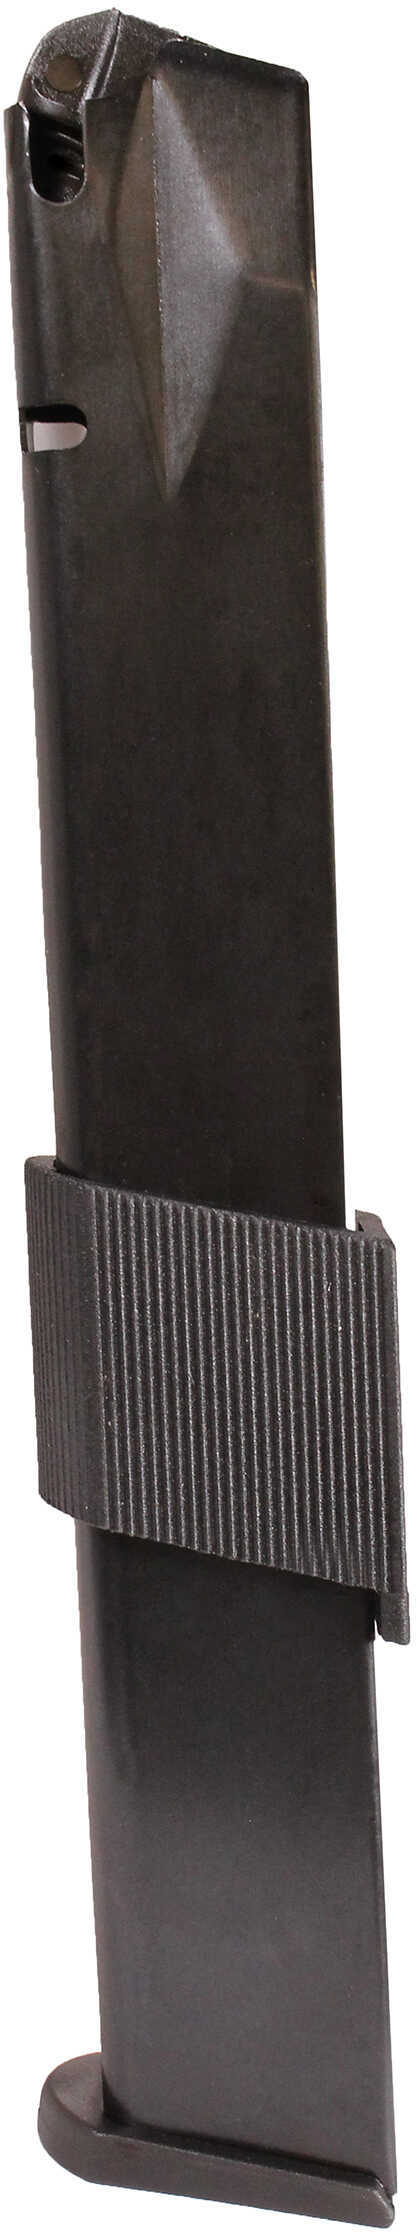 ProMag Mag CANIK TP9 9MM 32Rd Blk Steel